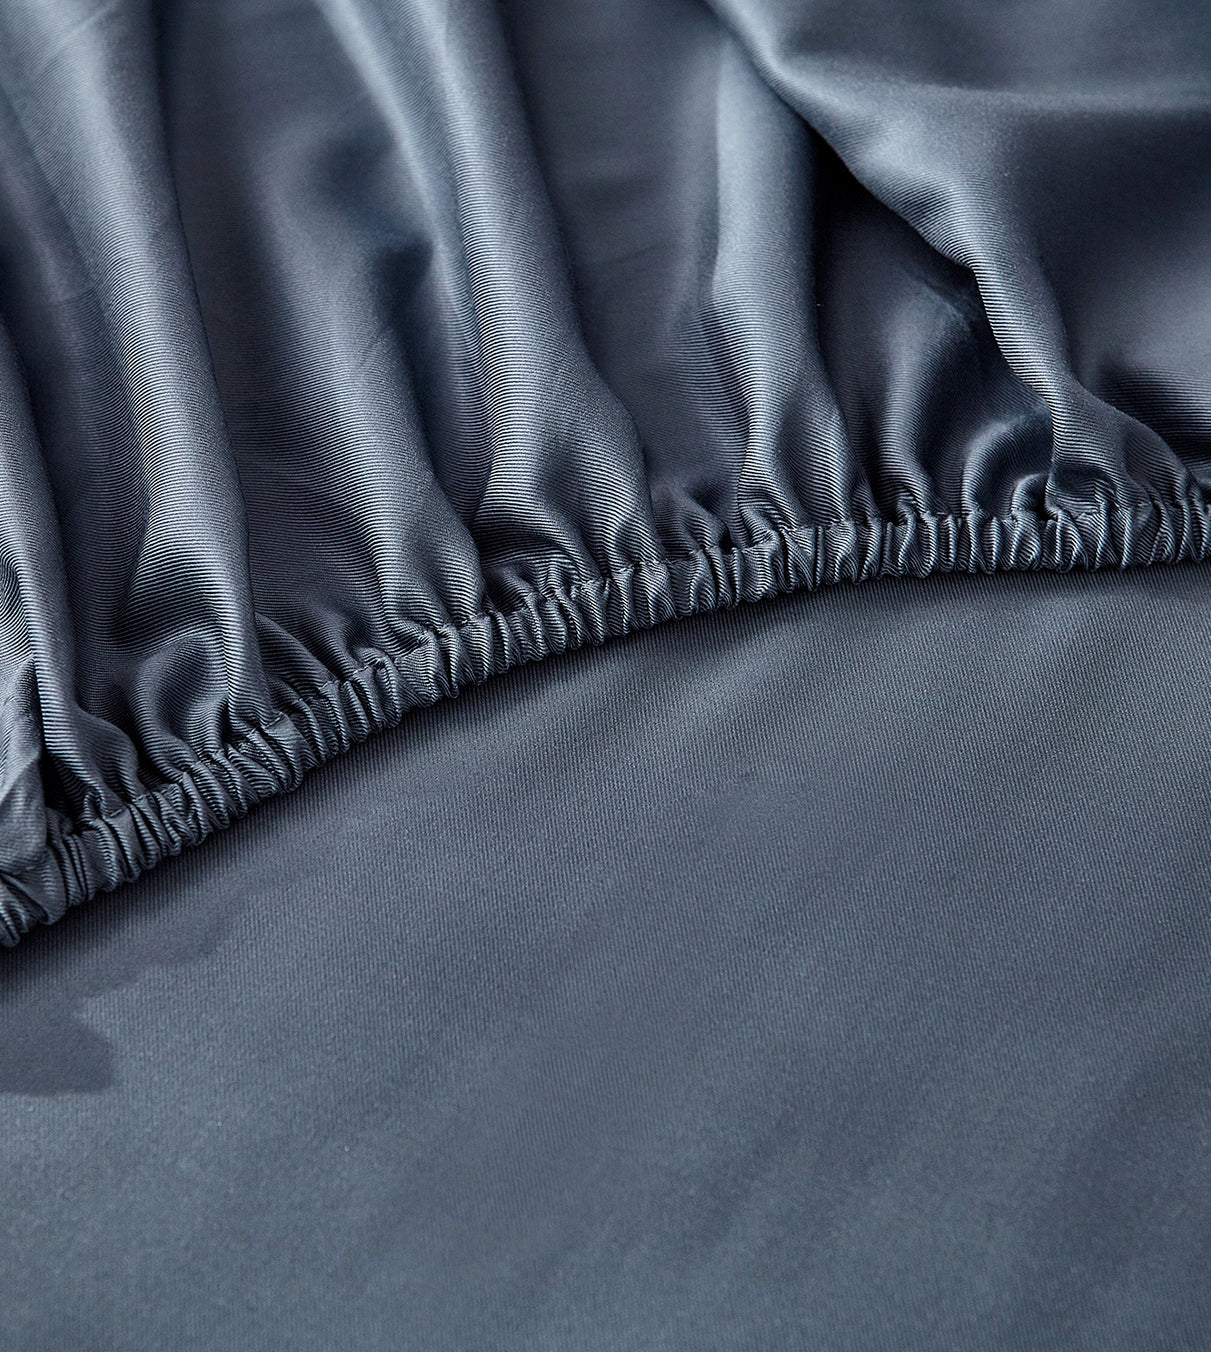 Product: Cooling Bamboo Sateen Sheet Set | Color: Blue Grey